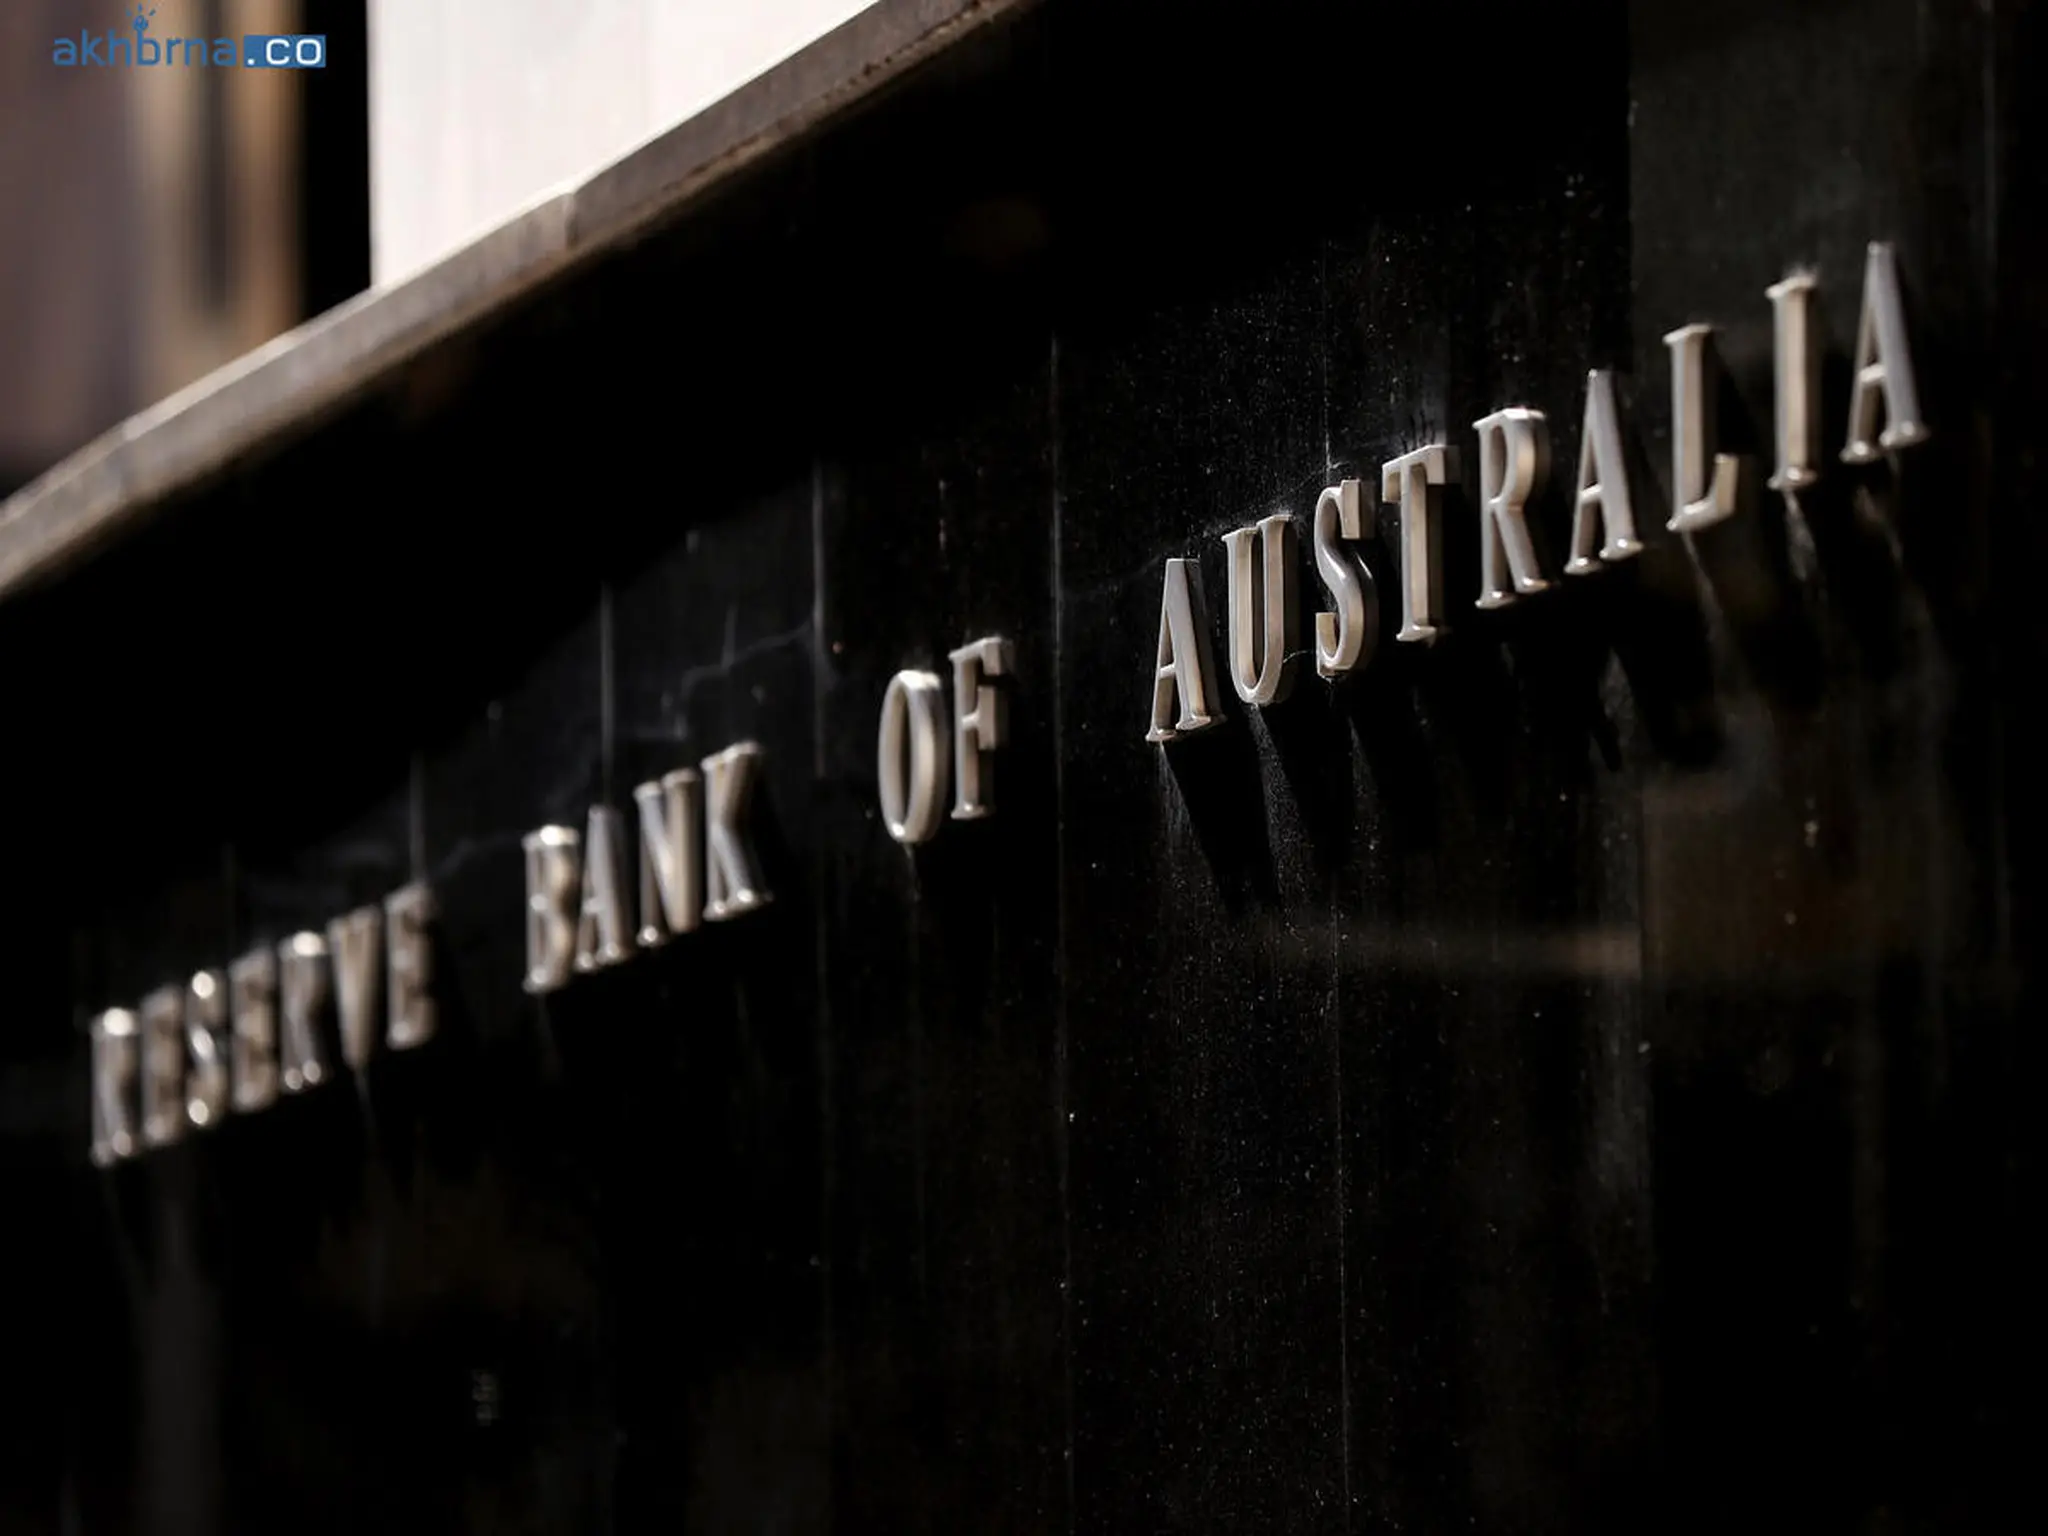 Reserve Bank of Australia maintains rates amid cooling inflation, signals potent